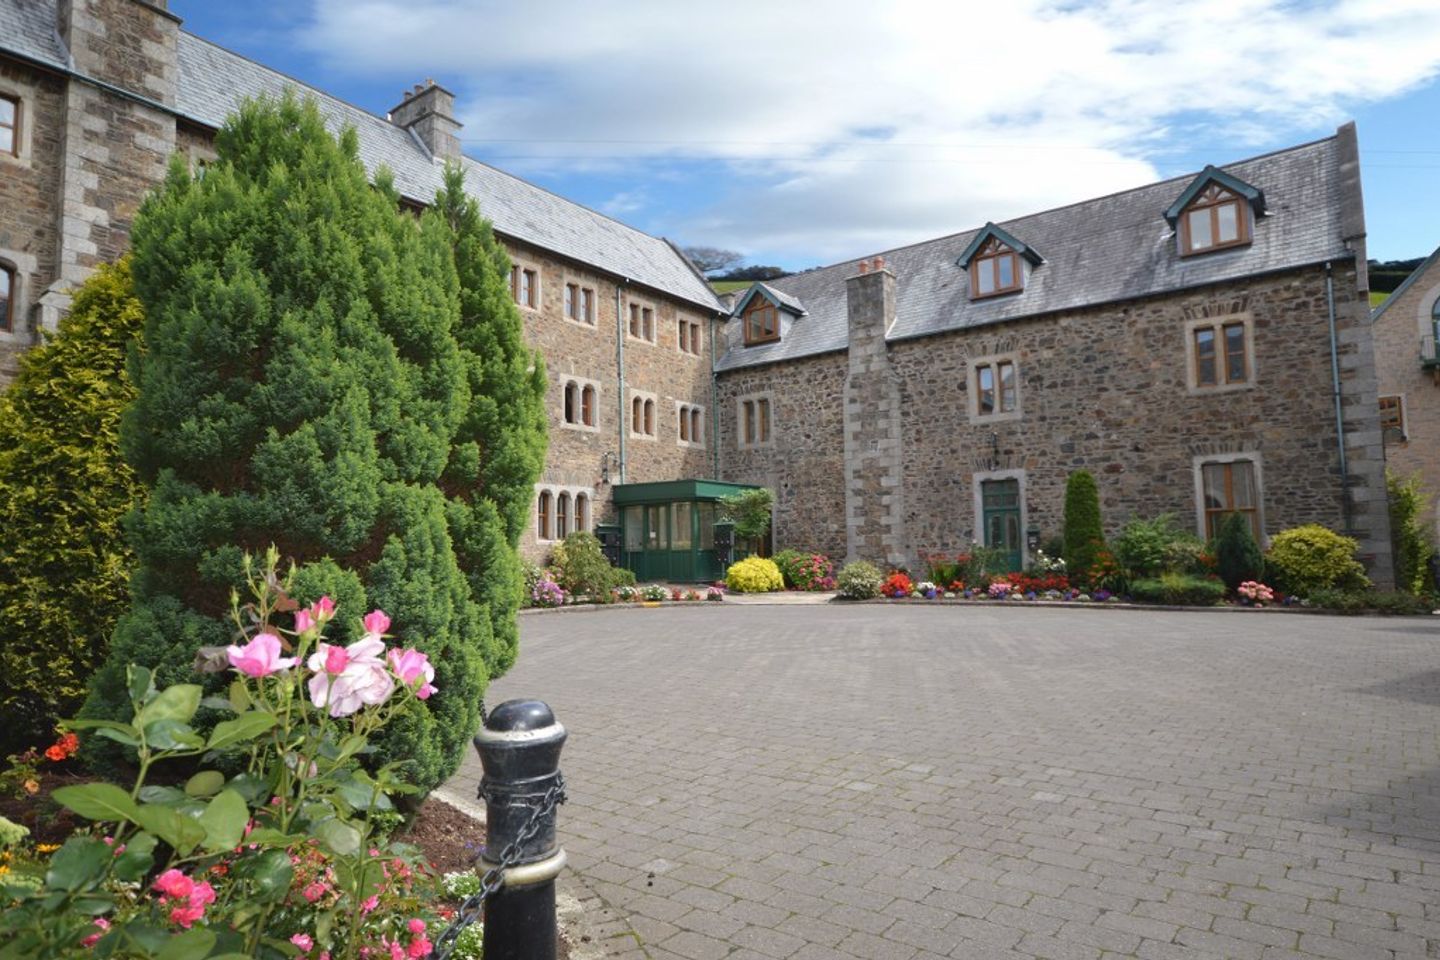 Apartment 51, Block 4, Priory Court, Gorey, Co. Wexford, Y25FP27